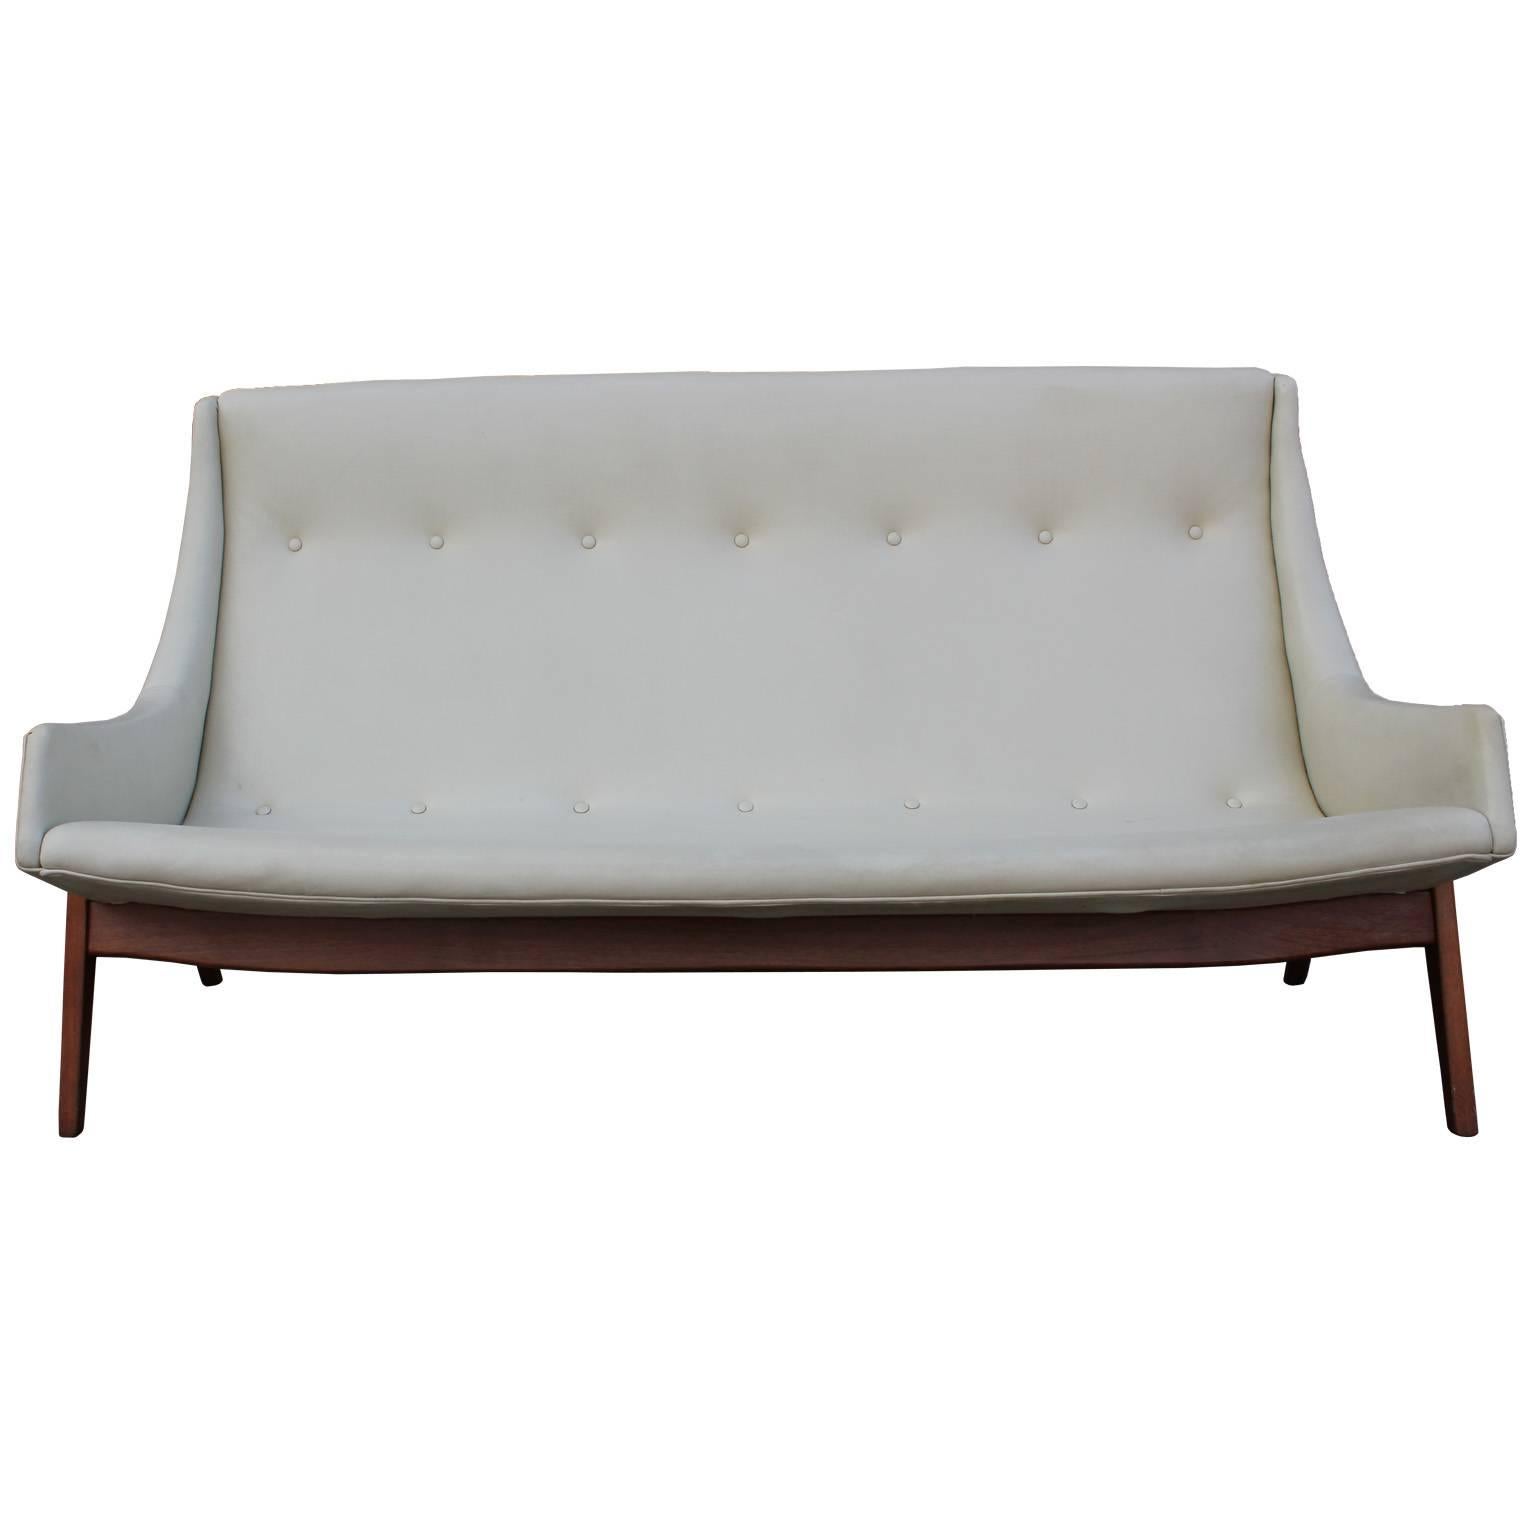 Early Milo Baughman for Thayer Coggin sofa. Sofa has elegant curved lines which nicely contrast the dramatic splayed teak legs. Sofa is in all original condition and needs to be reupholstered. We can do this for you at an additional charge. Stunning